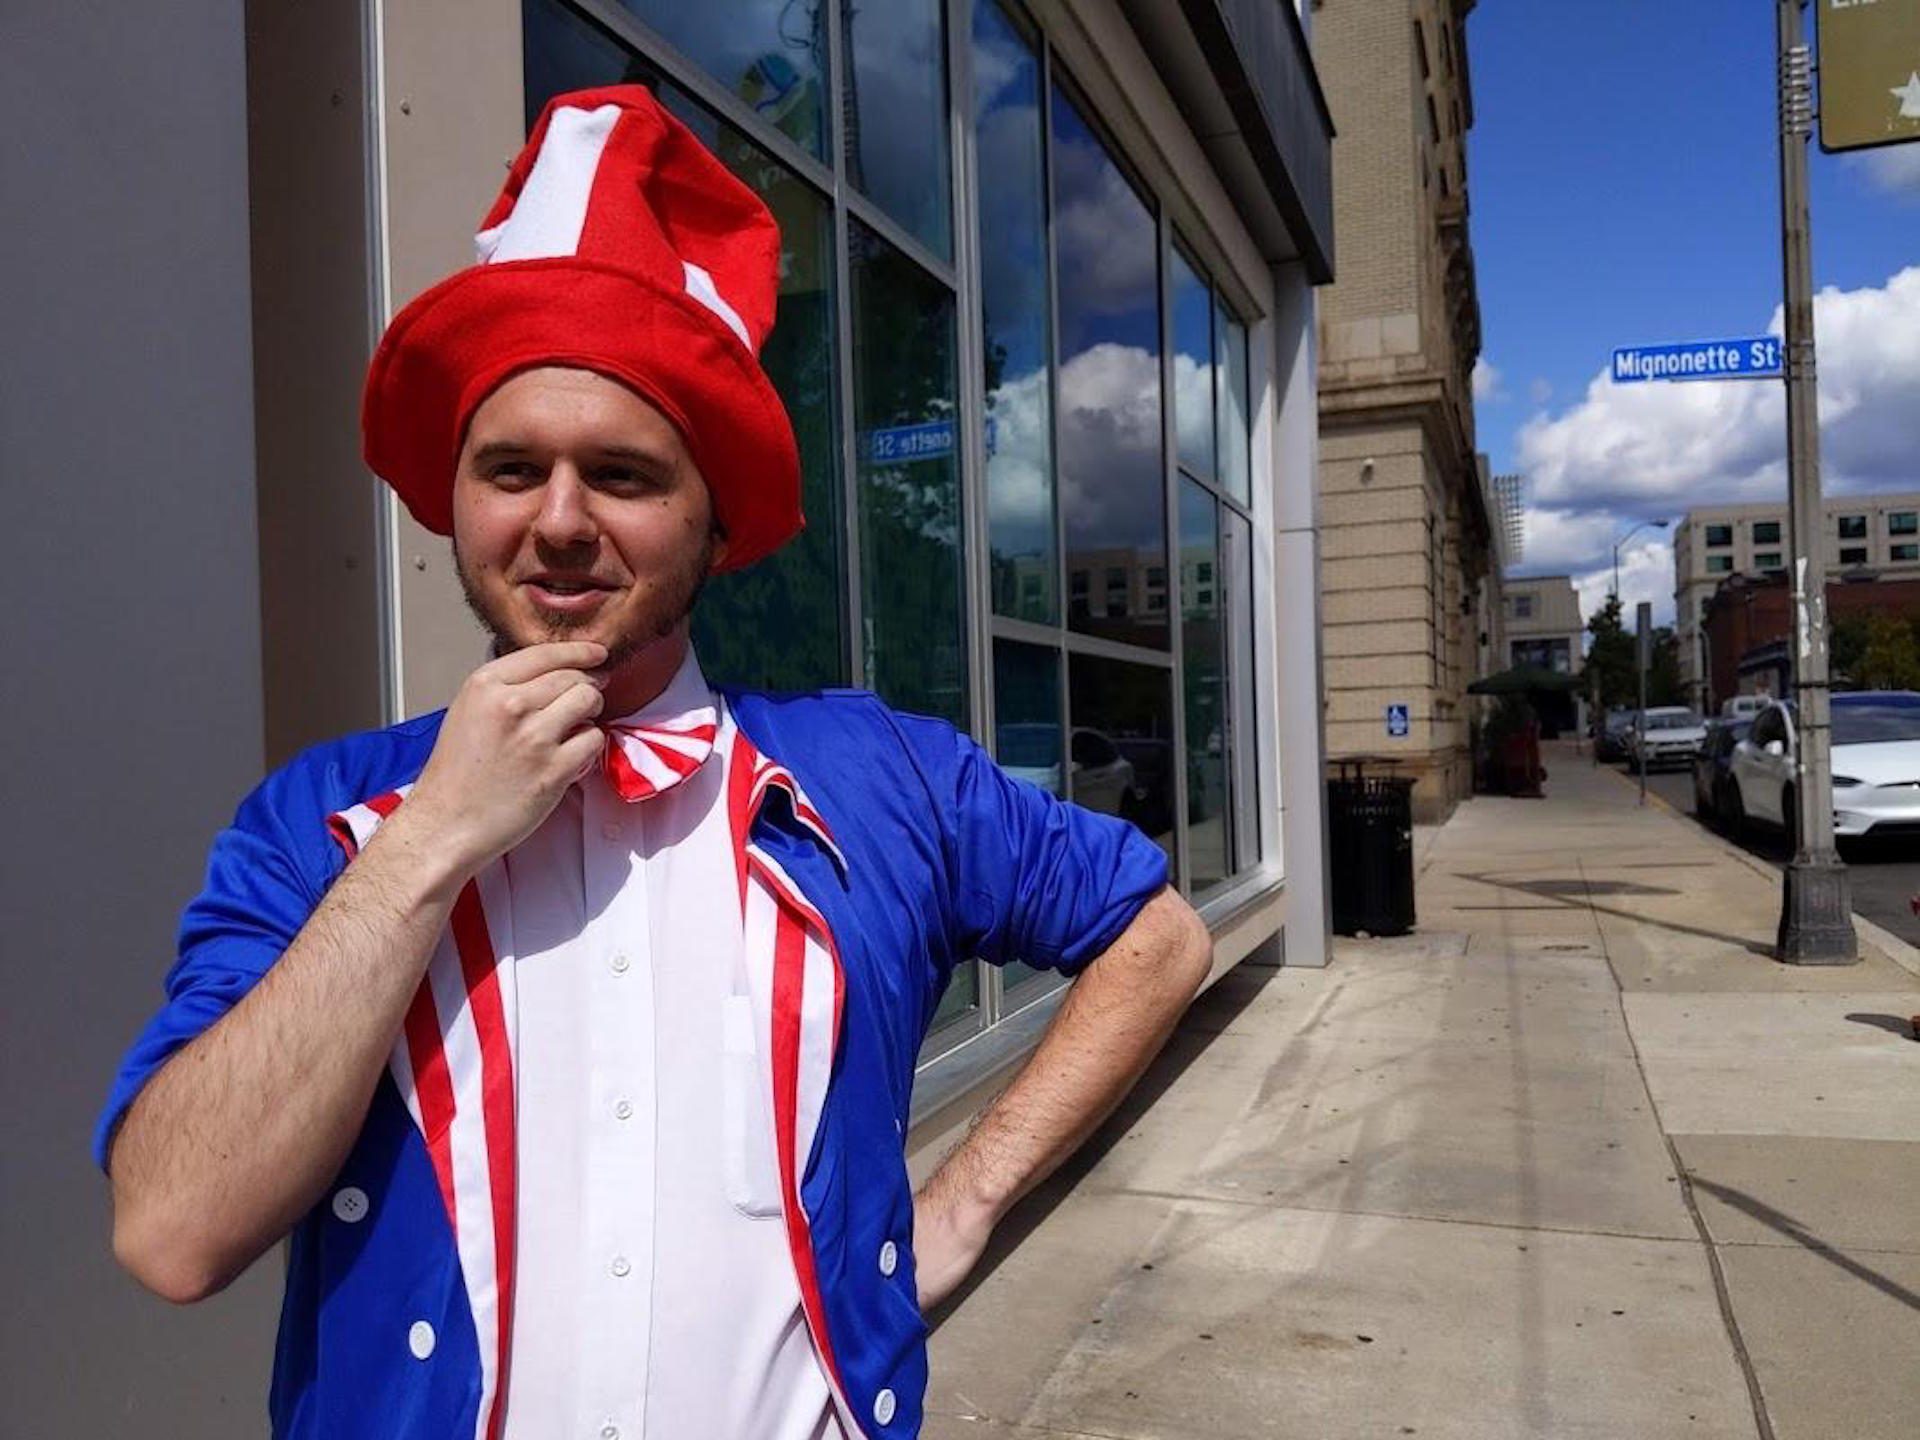 Google contract worker Steve Grygo voted against unionization. He wore an Uncle Sam outfit to work on Monday and Tuesday to encourage people to participate in the vote.